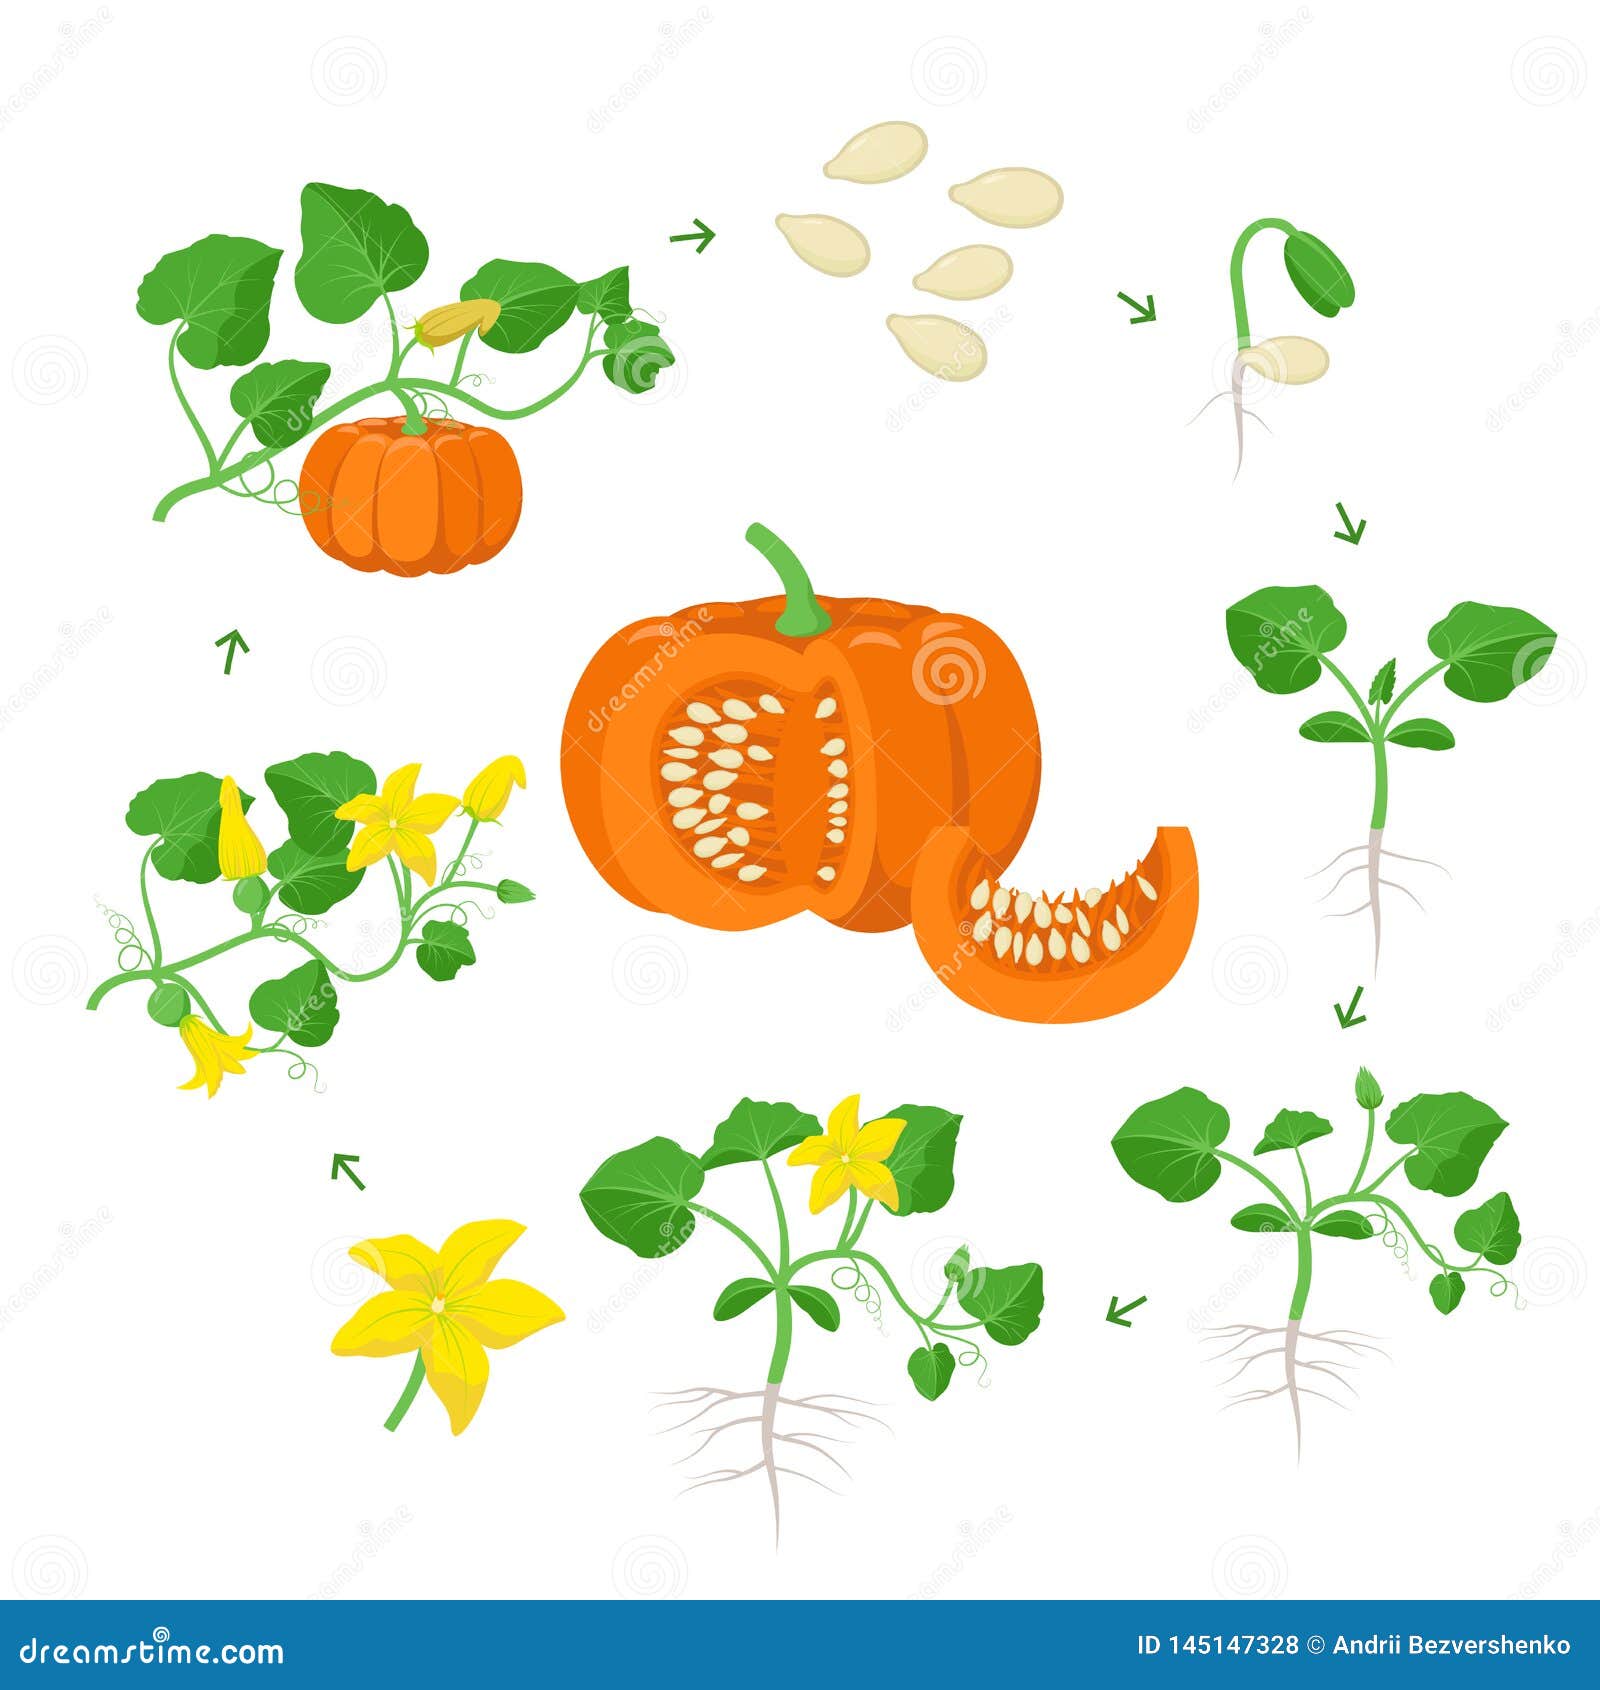 pumpkin plant growth stages infographic s in flat . life cycle of cucurbita from seeds, sprout to ripe